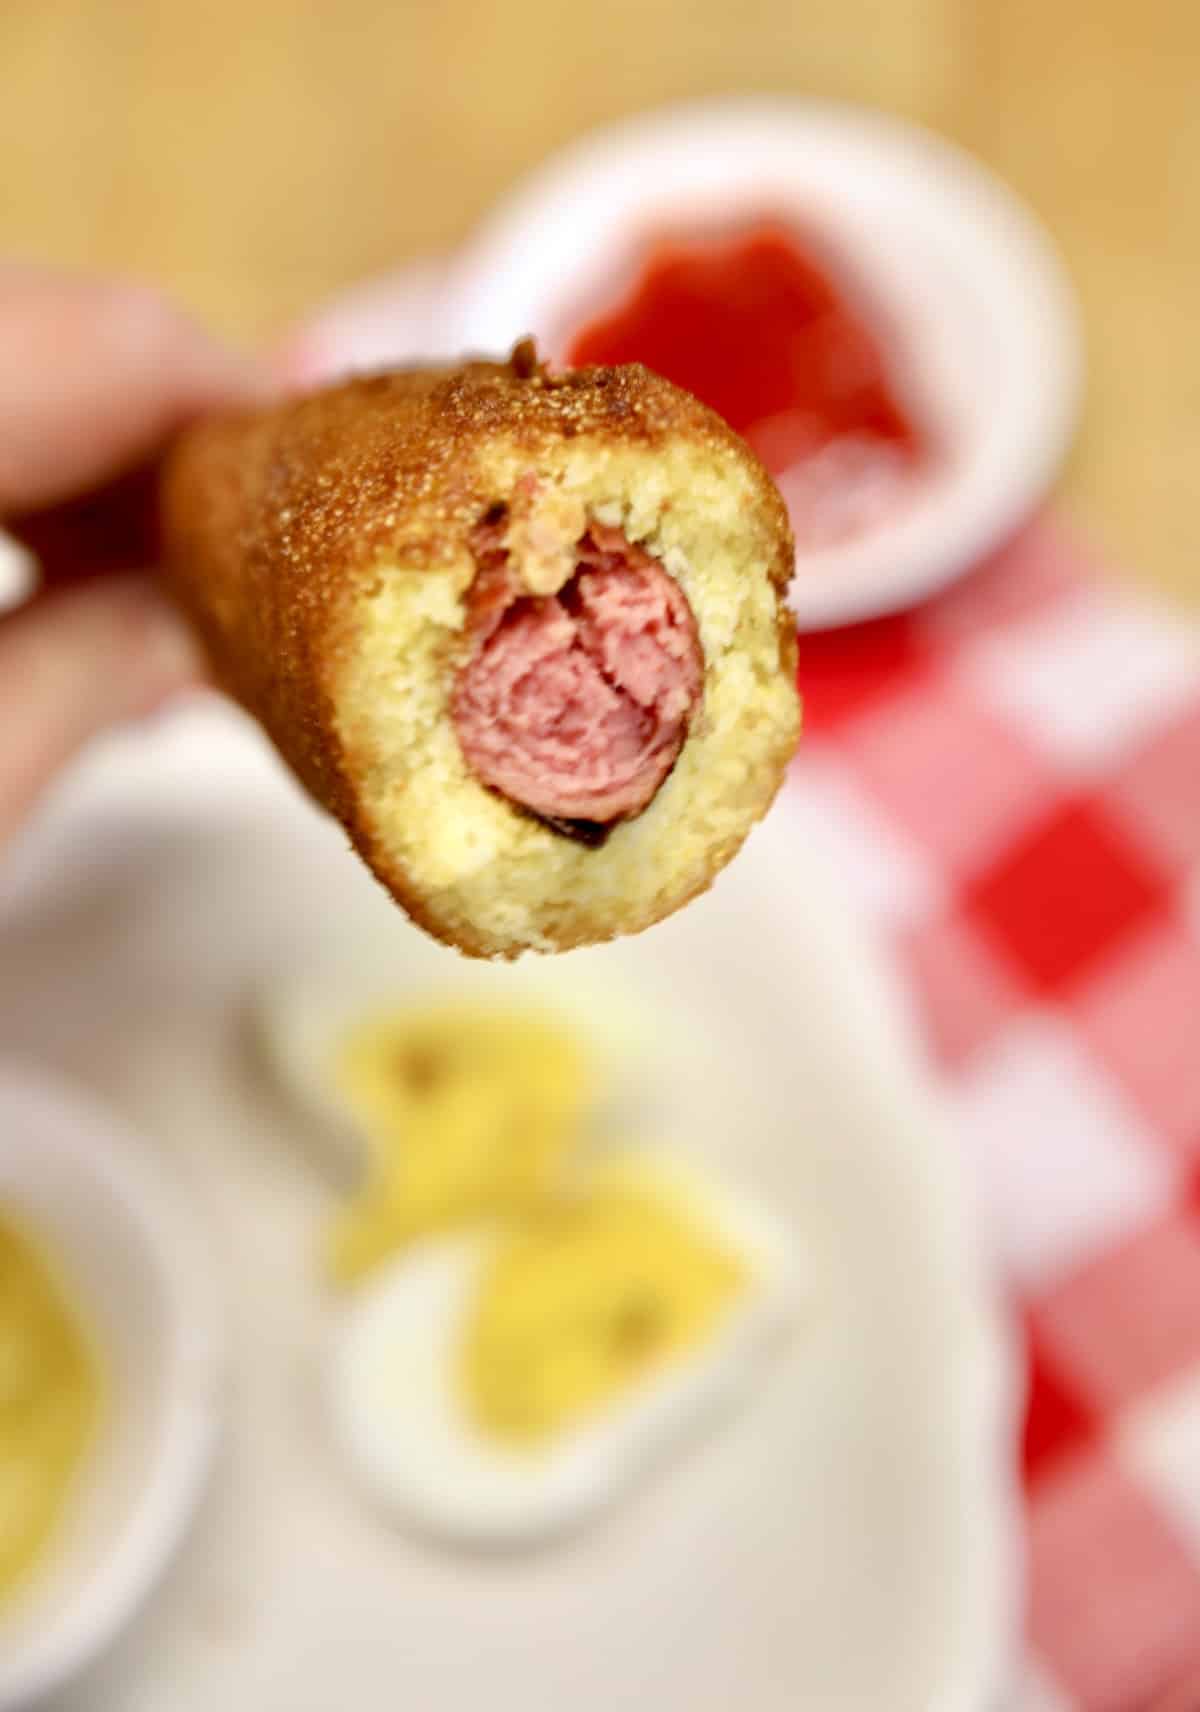 Closeup of a corn dog on a stick with hot dog showing.